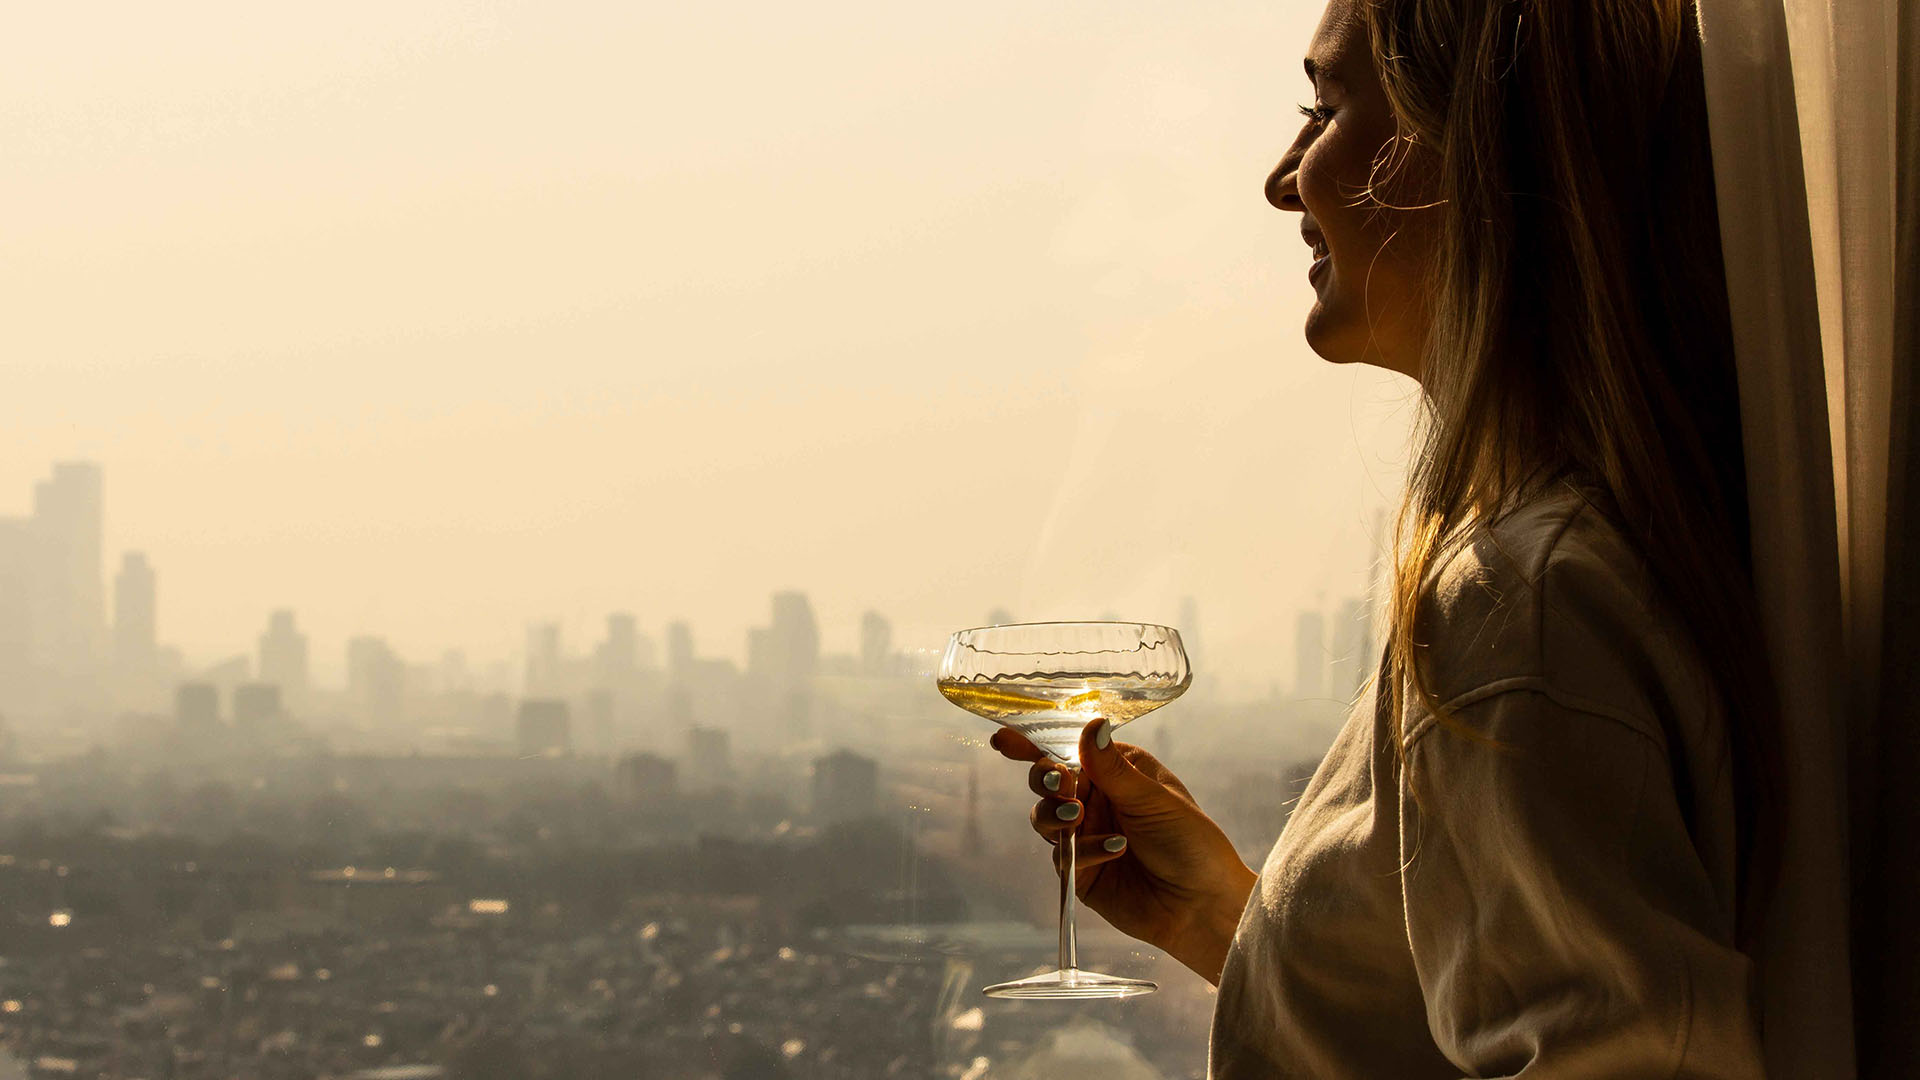 Female looking outside window with glass of wine